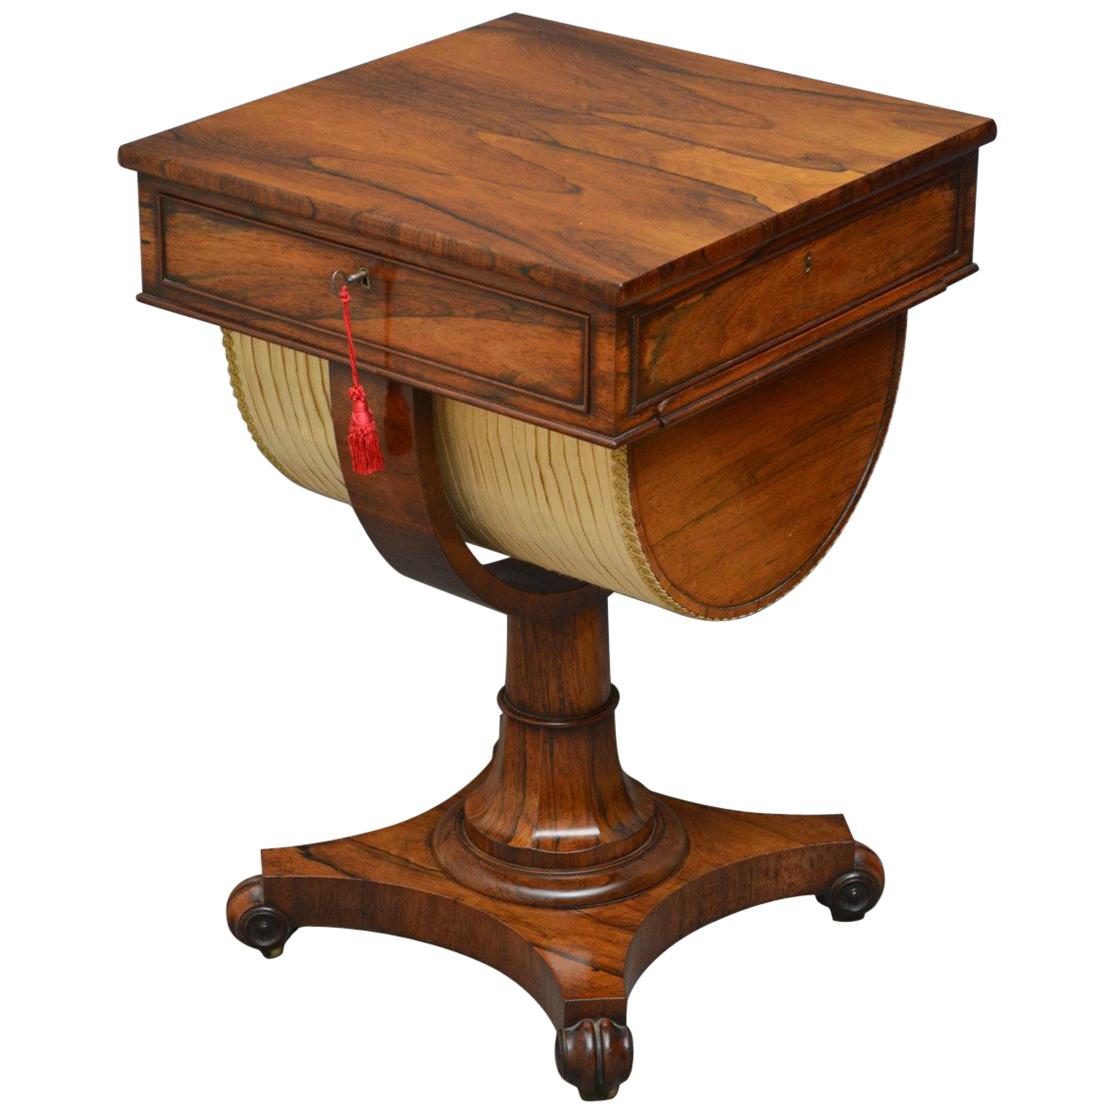 Unusual William IV Work and Writing Table